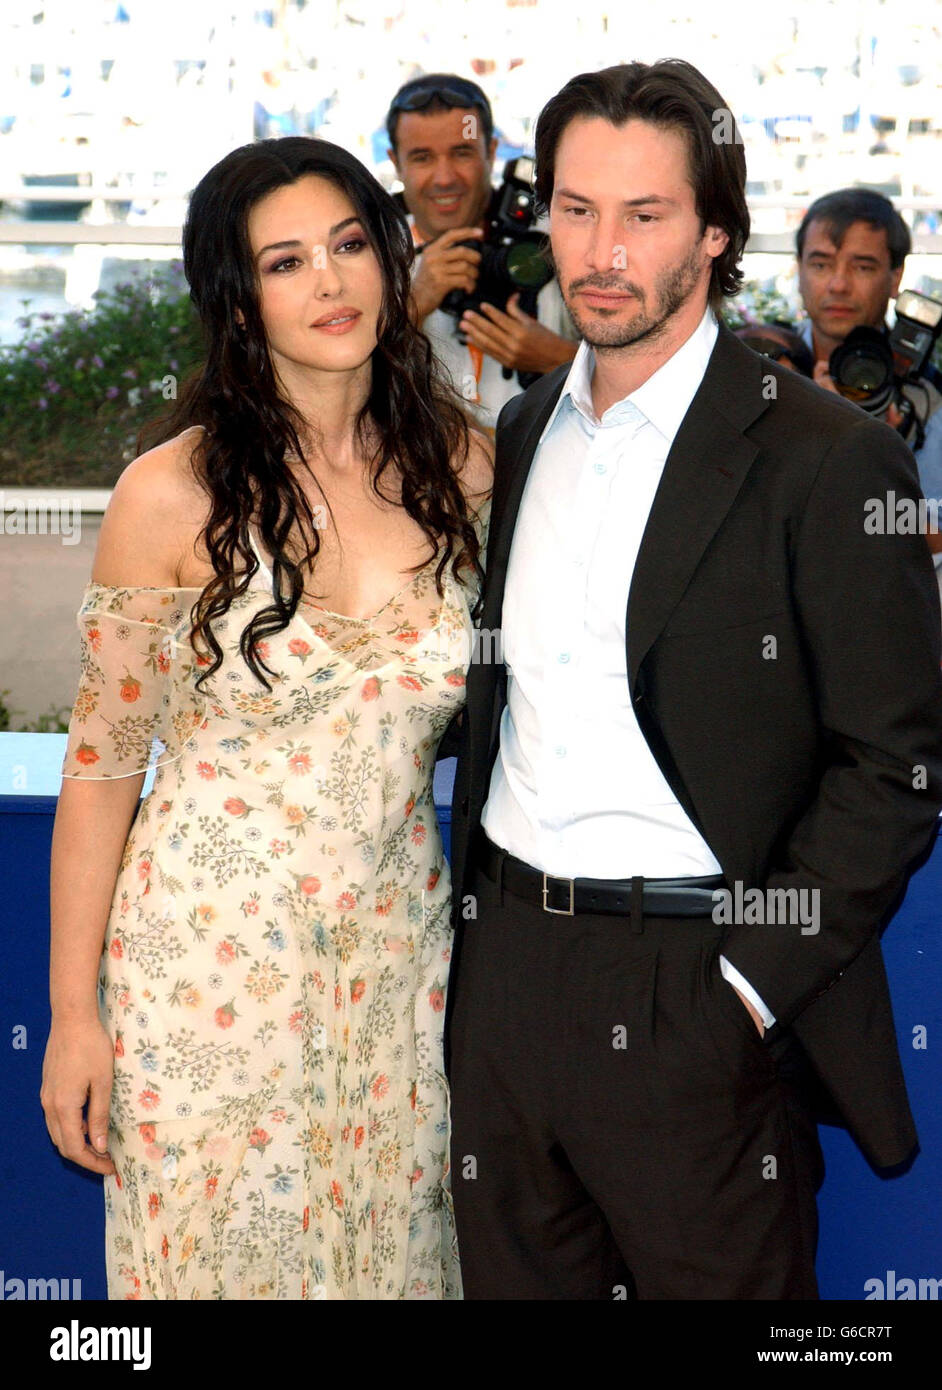 Actors Monica Bellucci and Keanu Reeves pose for photographers during a photocall to promote their new film The Matrix Reloaded at the Palias des Festival as part of the 56th Cannes Film Festival in southern France. Stock Photo